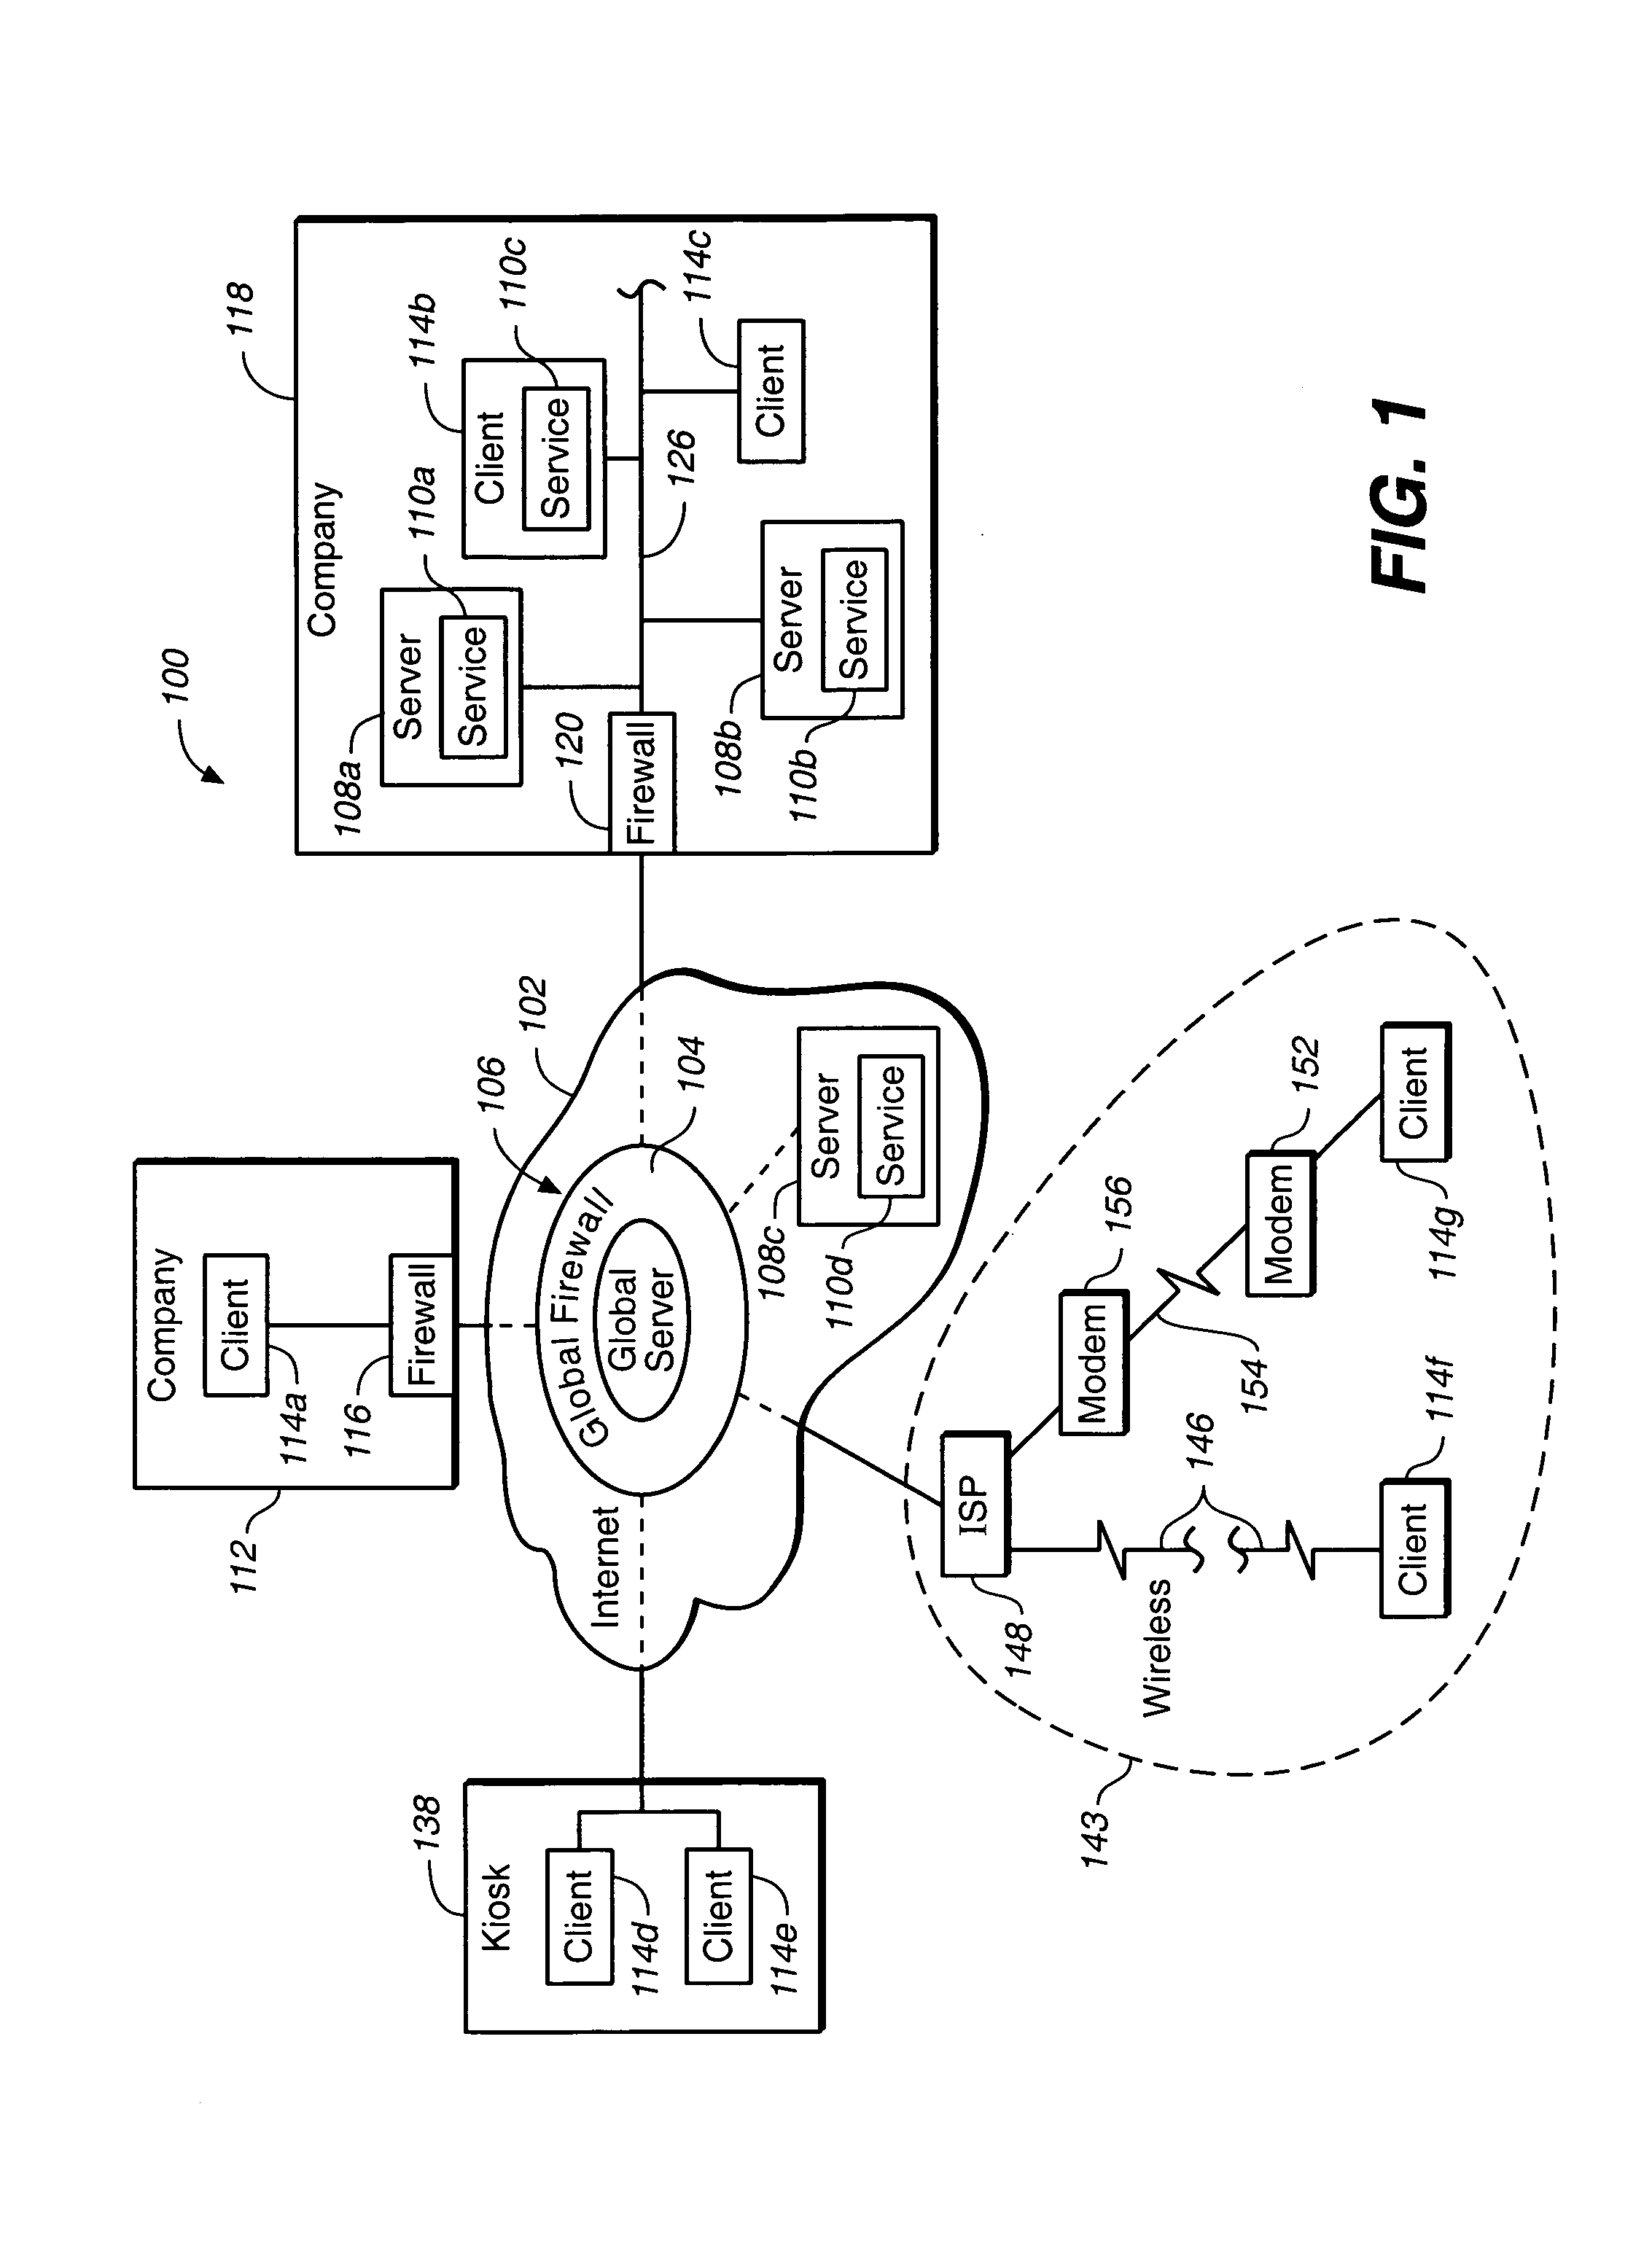 System and method for enabling secure access to services in a computer network